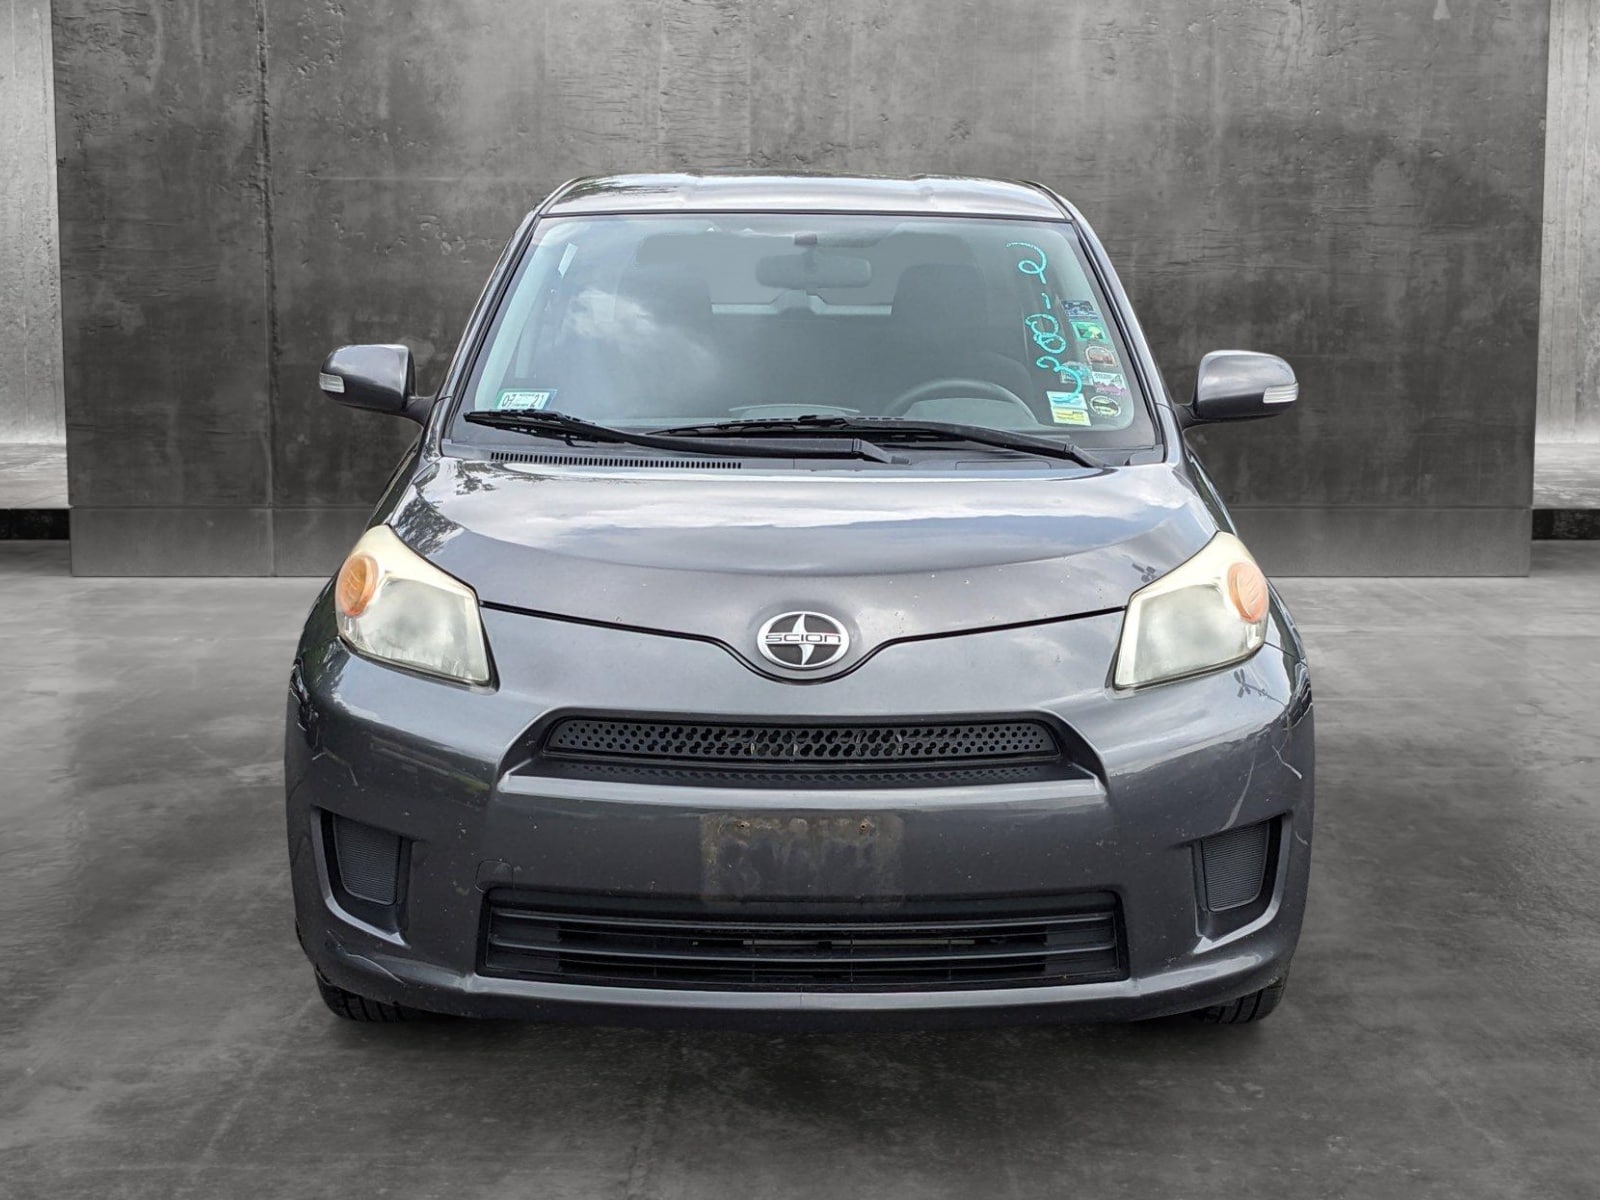 Used 2010 Scion xD Base with VIN JTKKU4B45A1002772 for sale in Des Plaines, IL